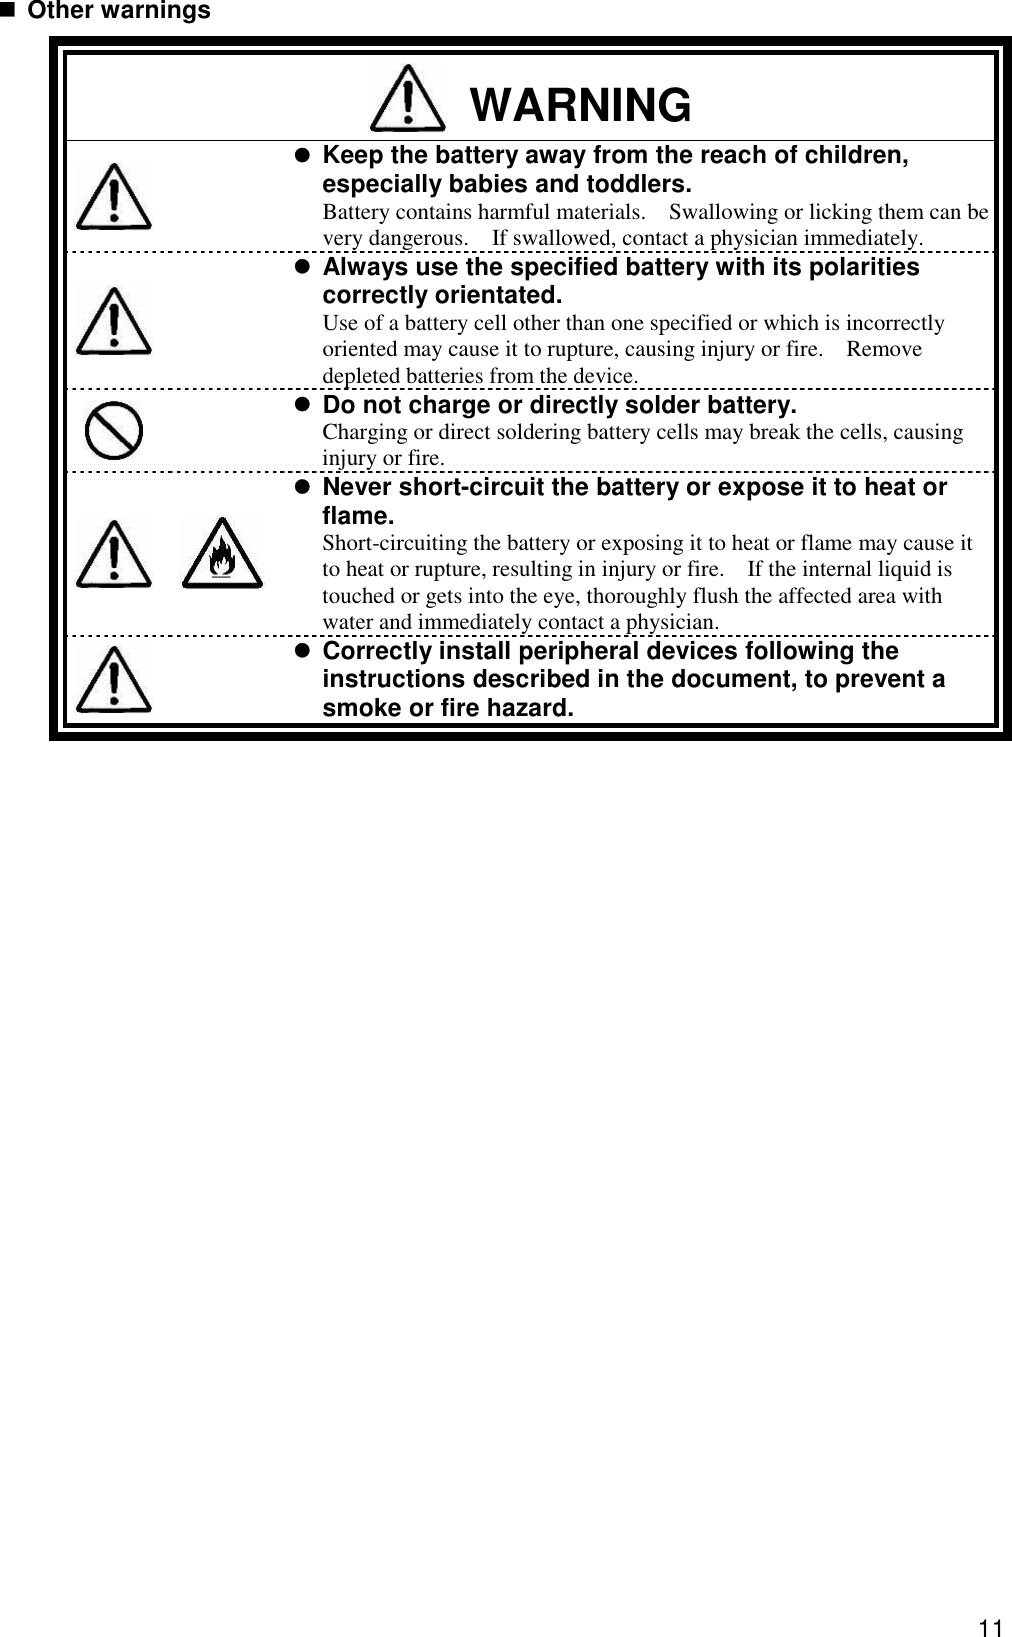 11  Other warnings  WARNING    Keep the battery away from the reach of children, especially babies and toddlers.   Battery contains harmful materials.  Swallowing or licking them can be very dangerous.  If swallowed, contact a physician immediately.     Always use the specified battery with its polarities correctly orientated.   Use of a battery cell other than one specified or which is incorrectly oriented may cause it to rupture, causing injury or fire.  Remove depleted batteries from the device.    Do not charge or directly solder battery. Charging or direct soldering battery cells may break the cells, causing injury or fire.    Never short-circuit the battery or expose it to heat or flame. Short-circuiting the battery or exposing it to heat or flame may cause it to heat or rupture, resulting in injury or fire.  If the internal liquid is touched or gets into the eye, thoroughly flush the affected area with water and immediately contact a physician.    Correctly install peripheral devices following the instructions described in the document, to prevent a smoke or fire hazard.  